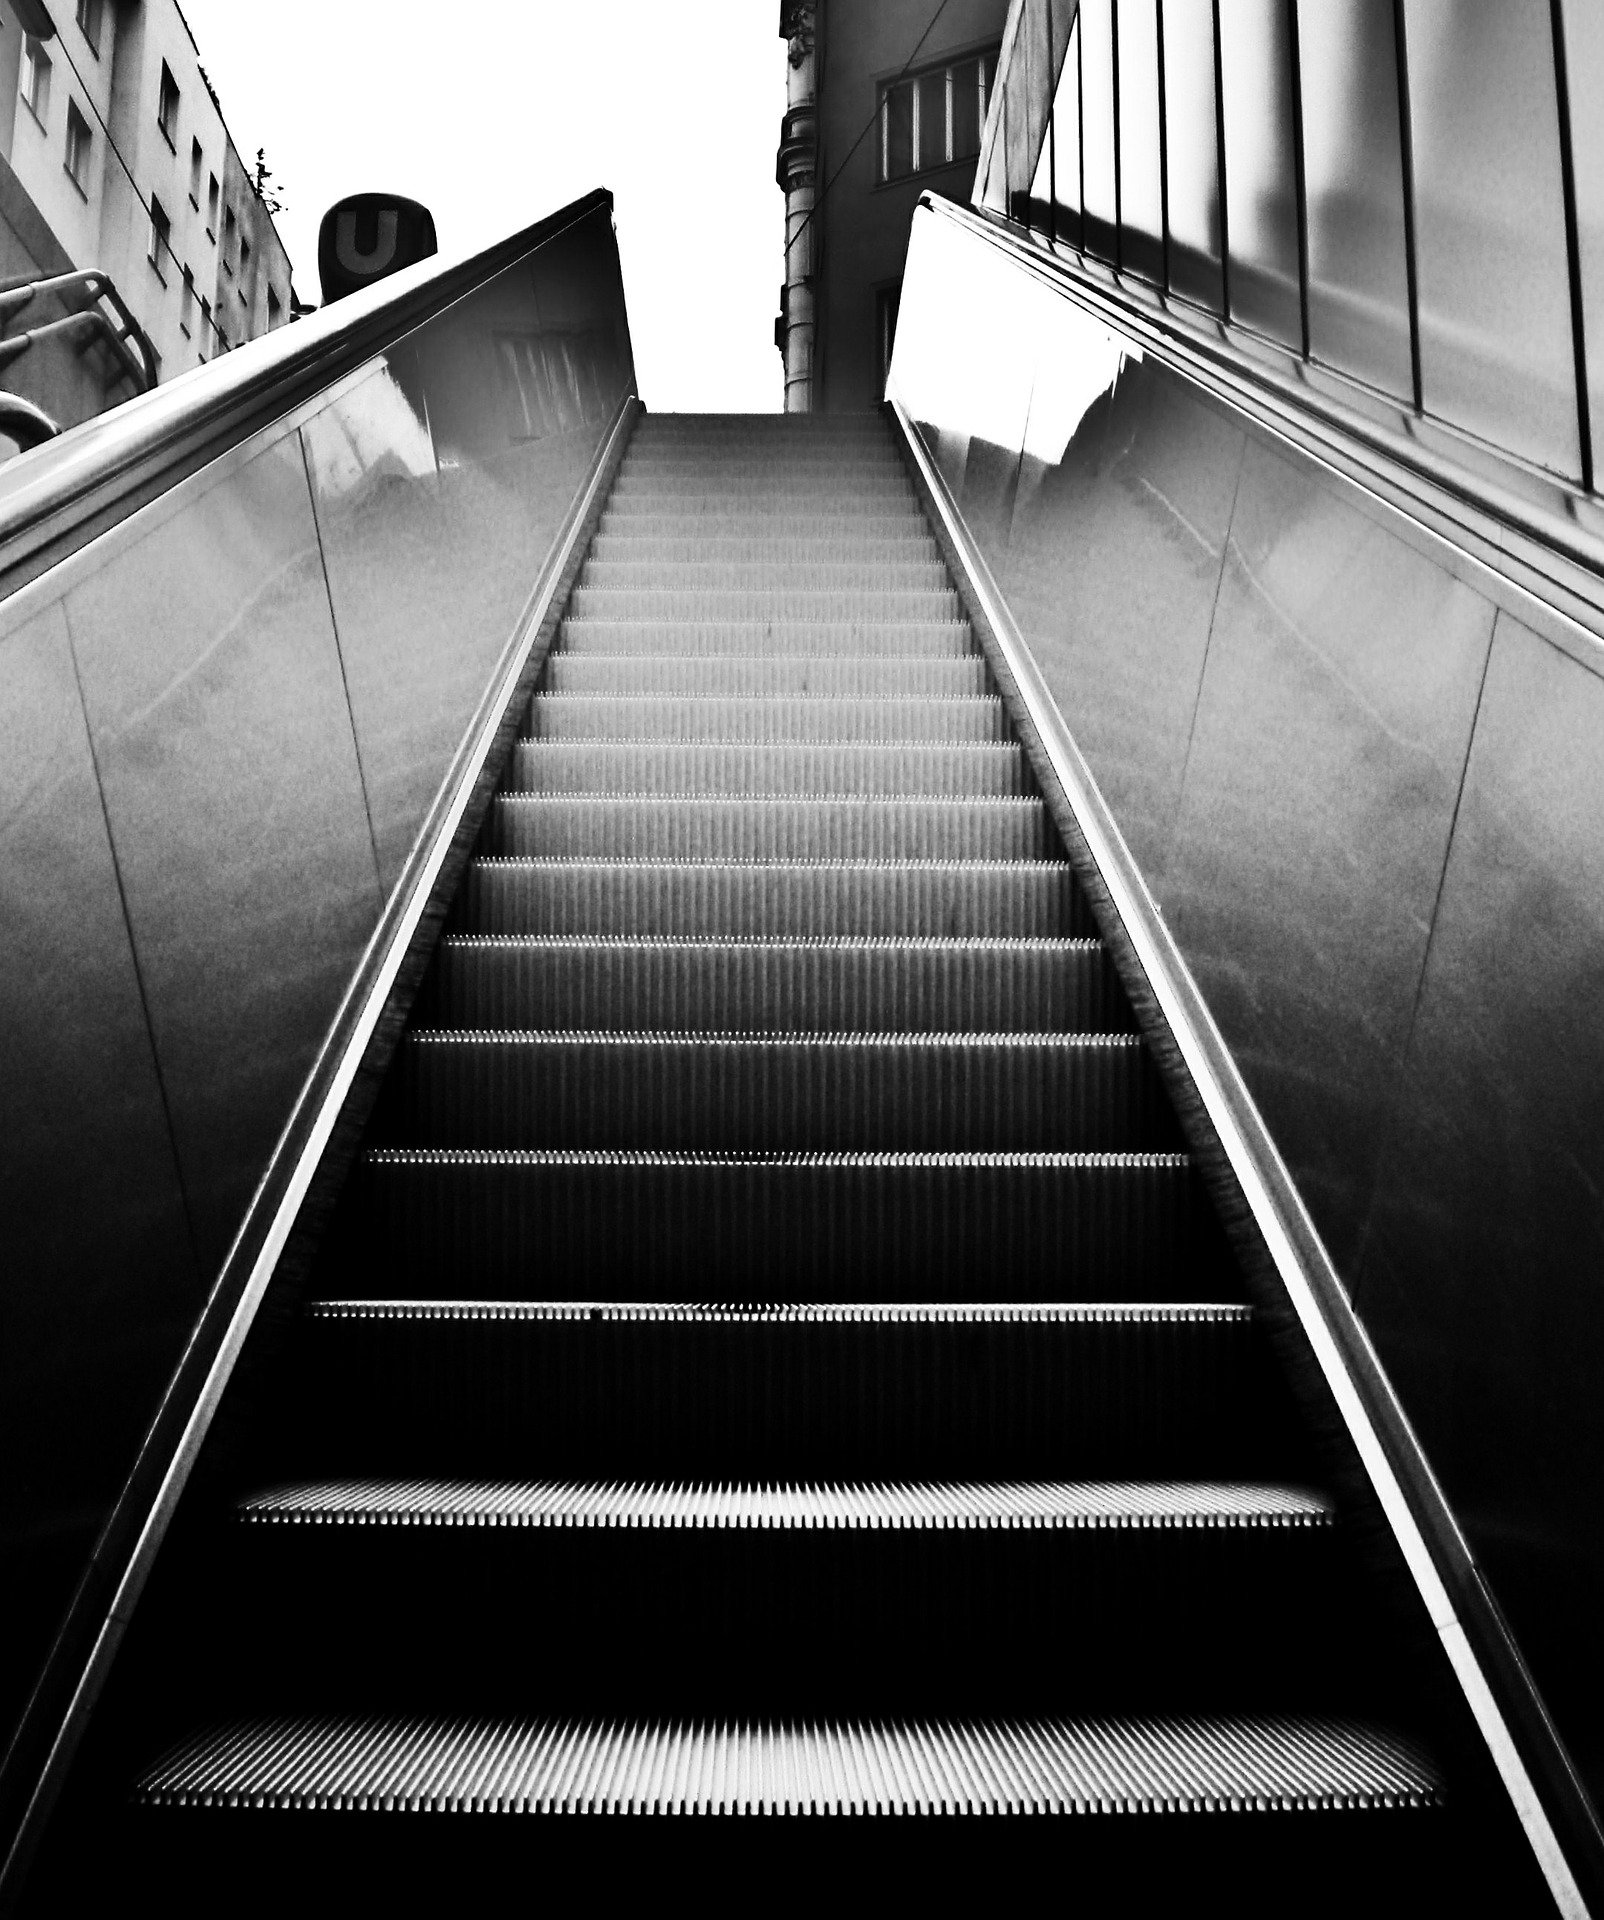 A black-and-white photo of an escalator.